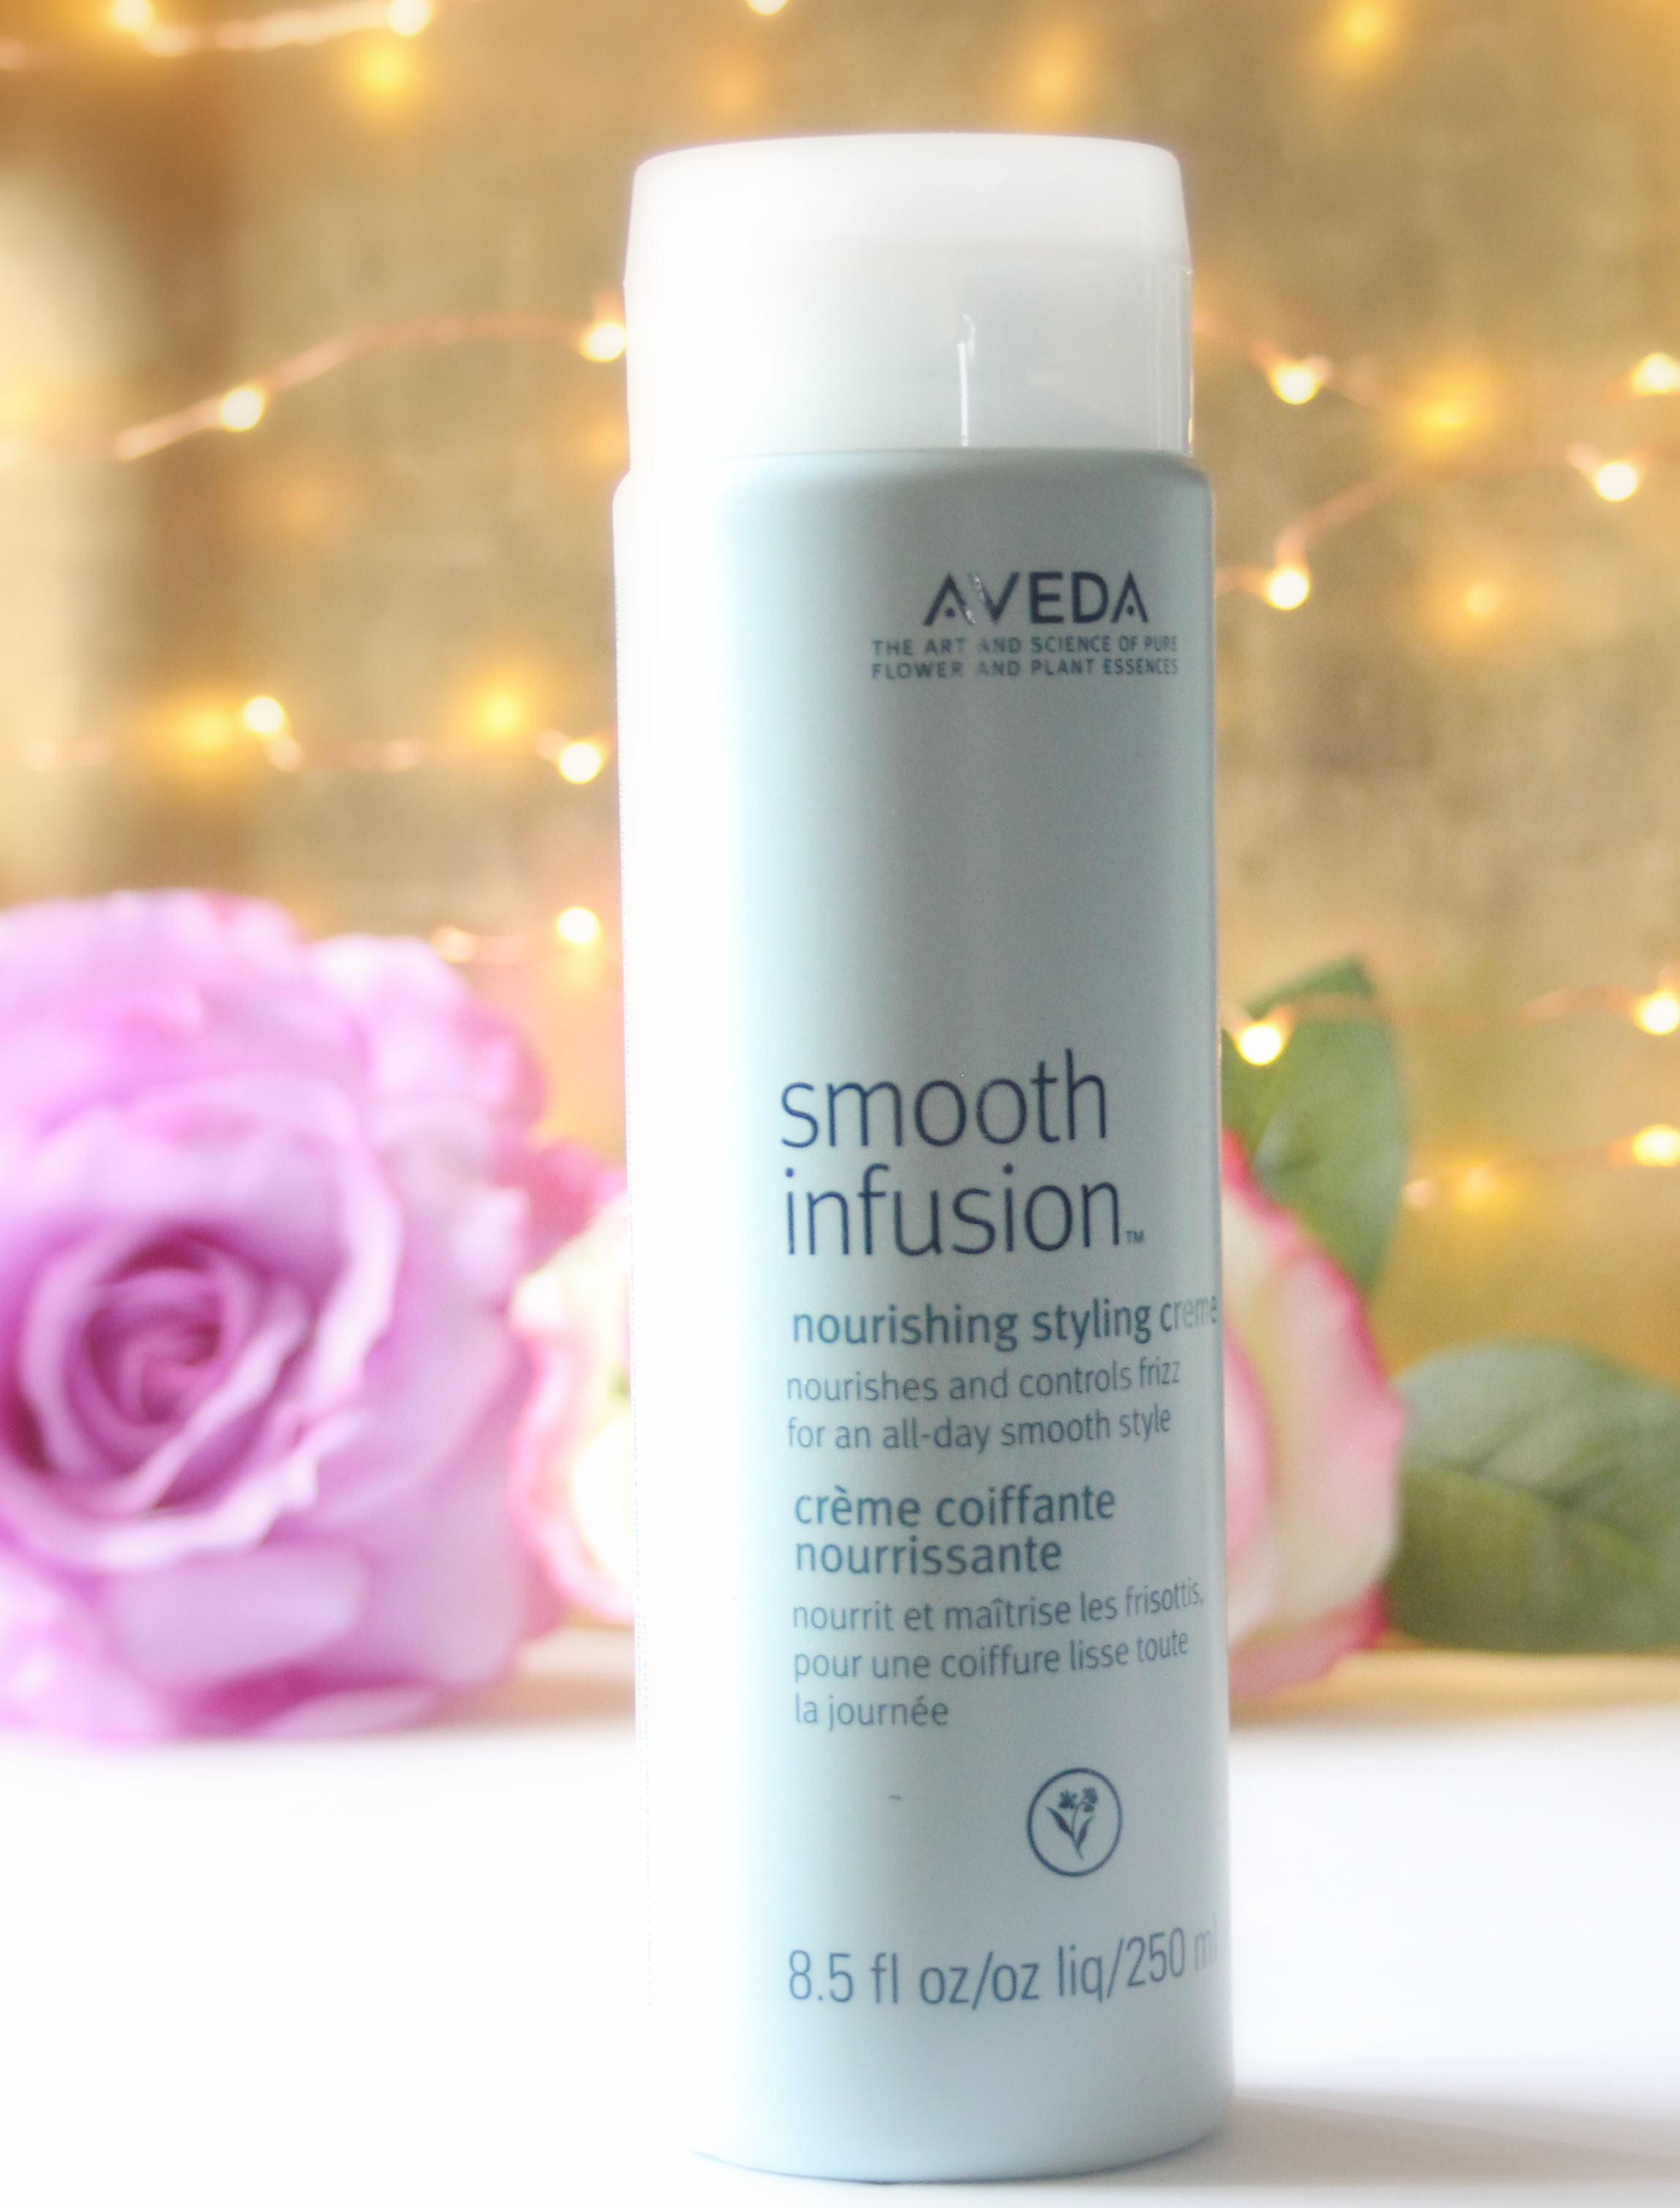 Aveda Smooth Infusion Nourishing Styling Creme Review Myhighestselfblog Com Bloglovin